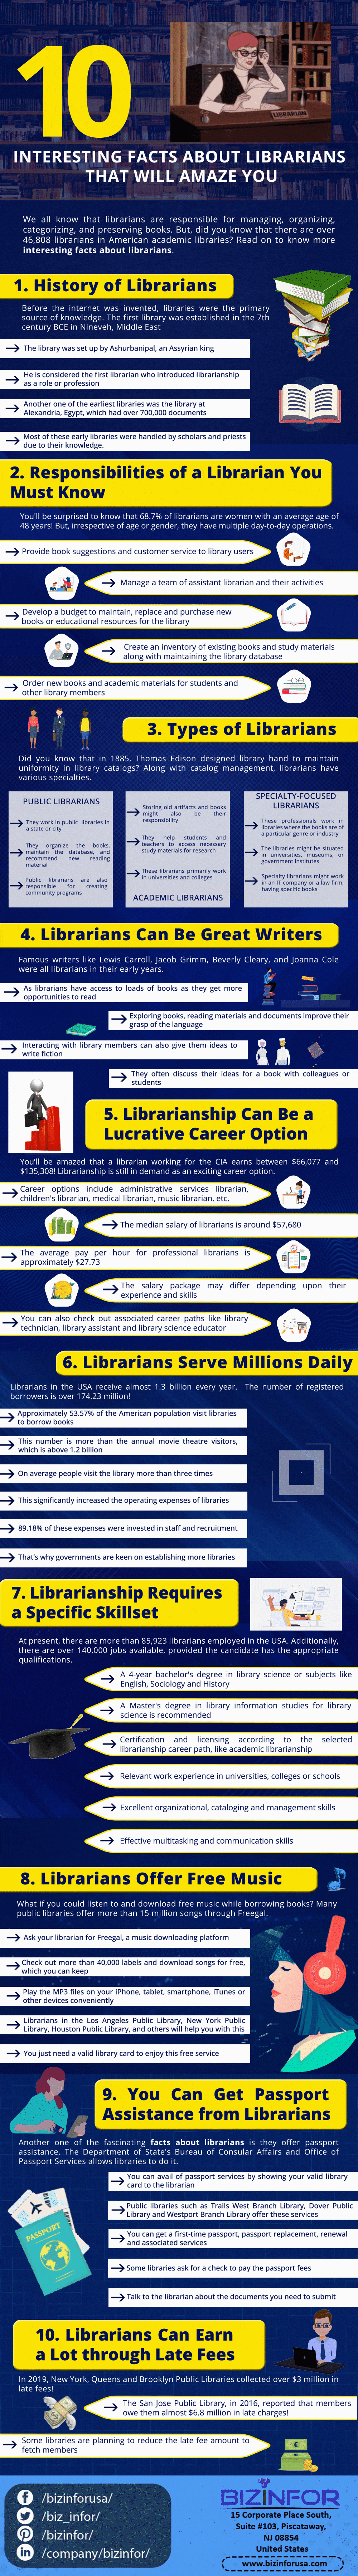 Interesting Facts About Librarians That Will Amaze You 